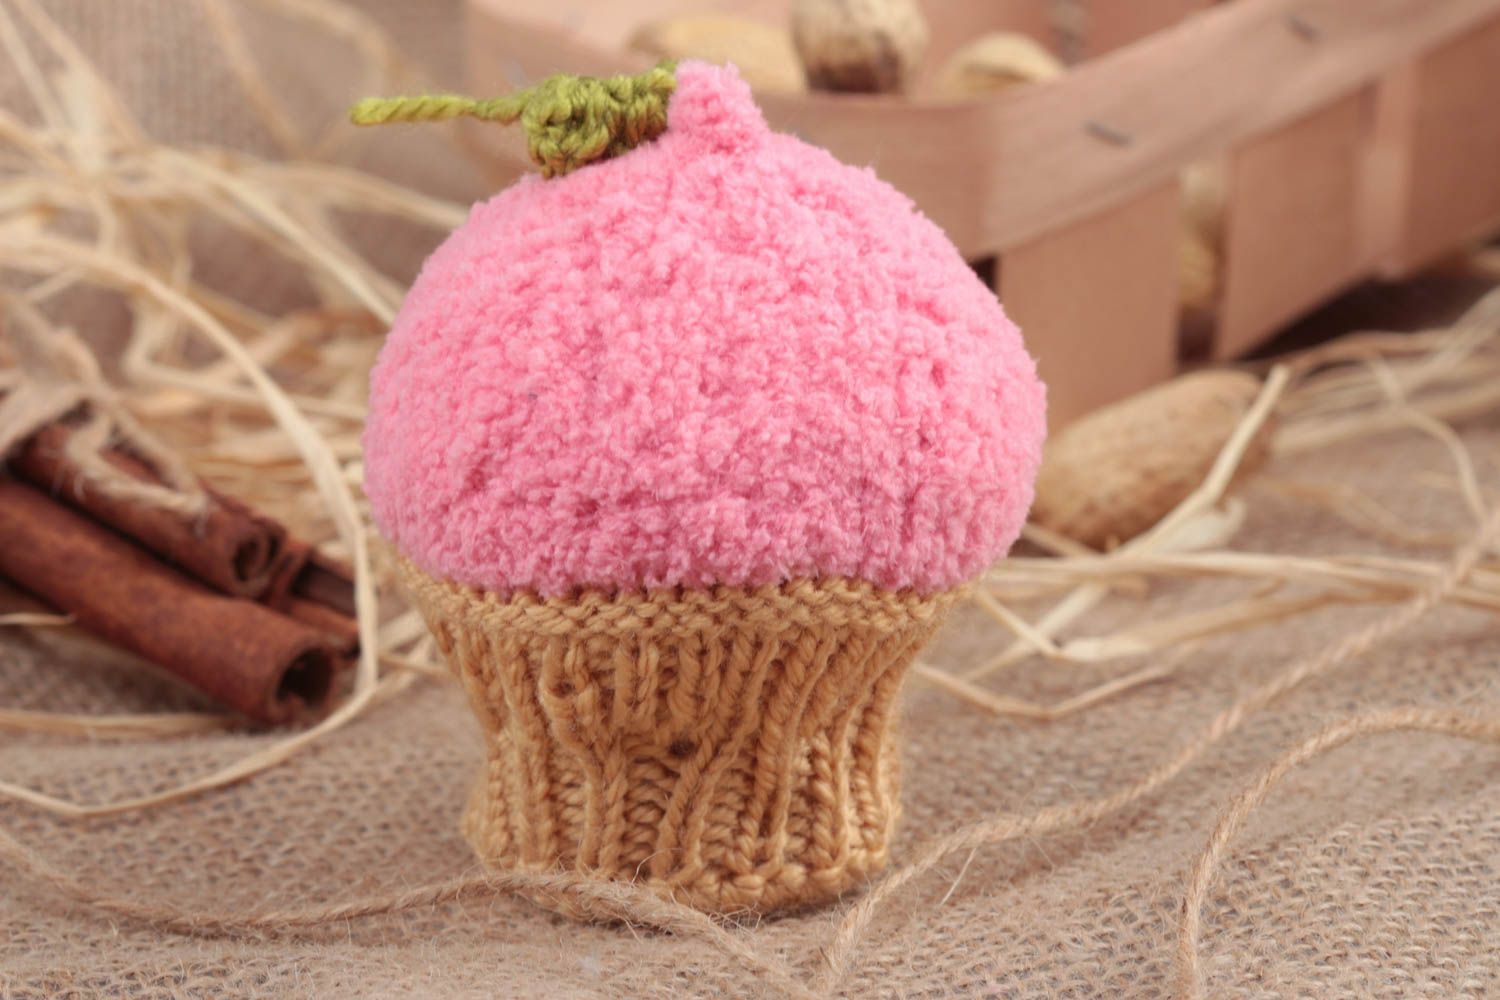 Handmade soft toy crocheted of acrylic threads pink cake for kids and decor photo 1